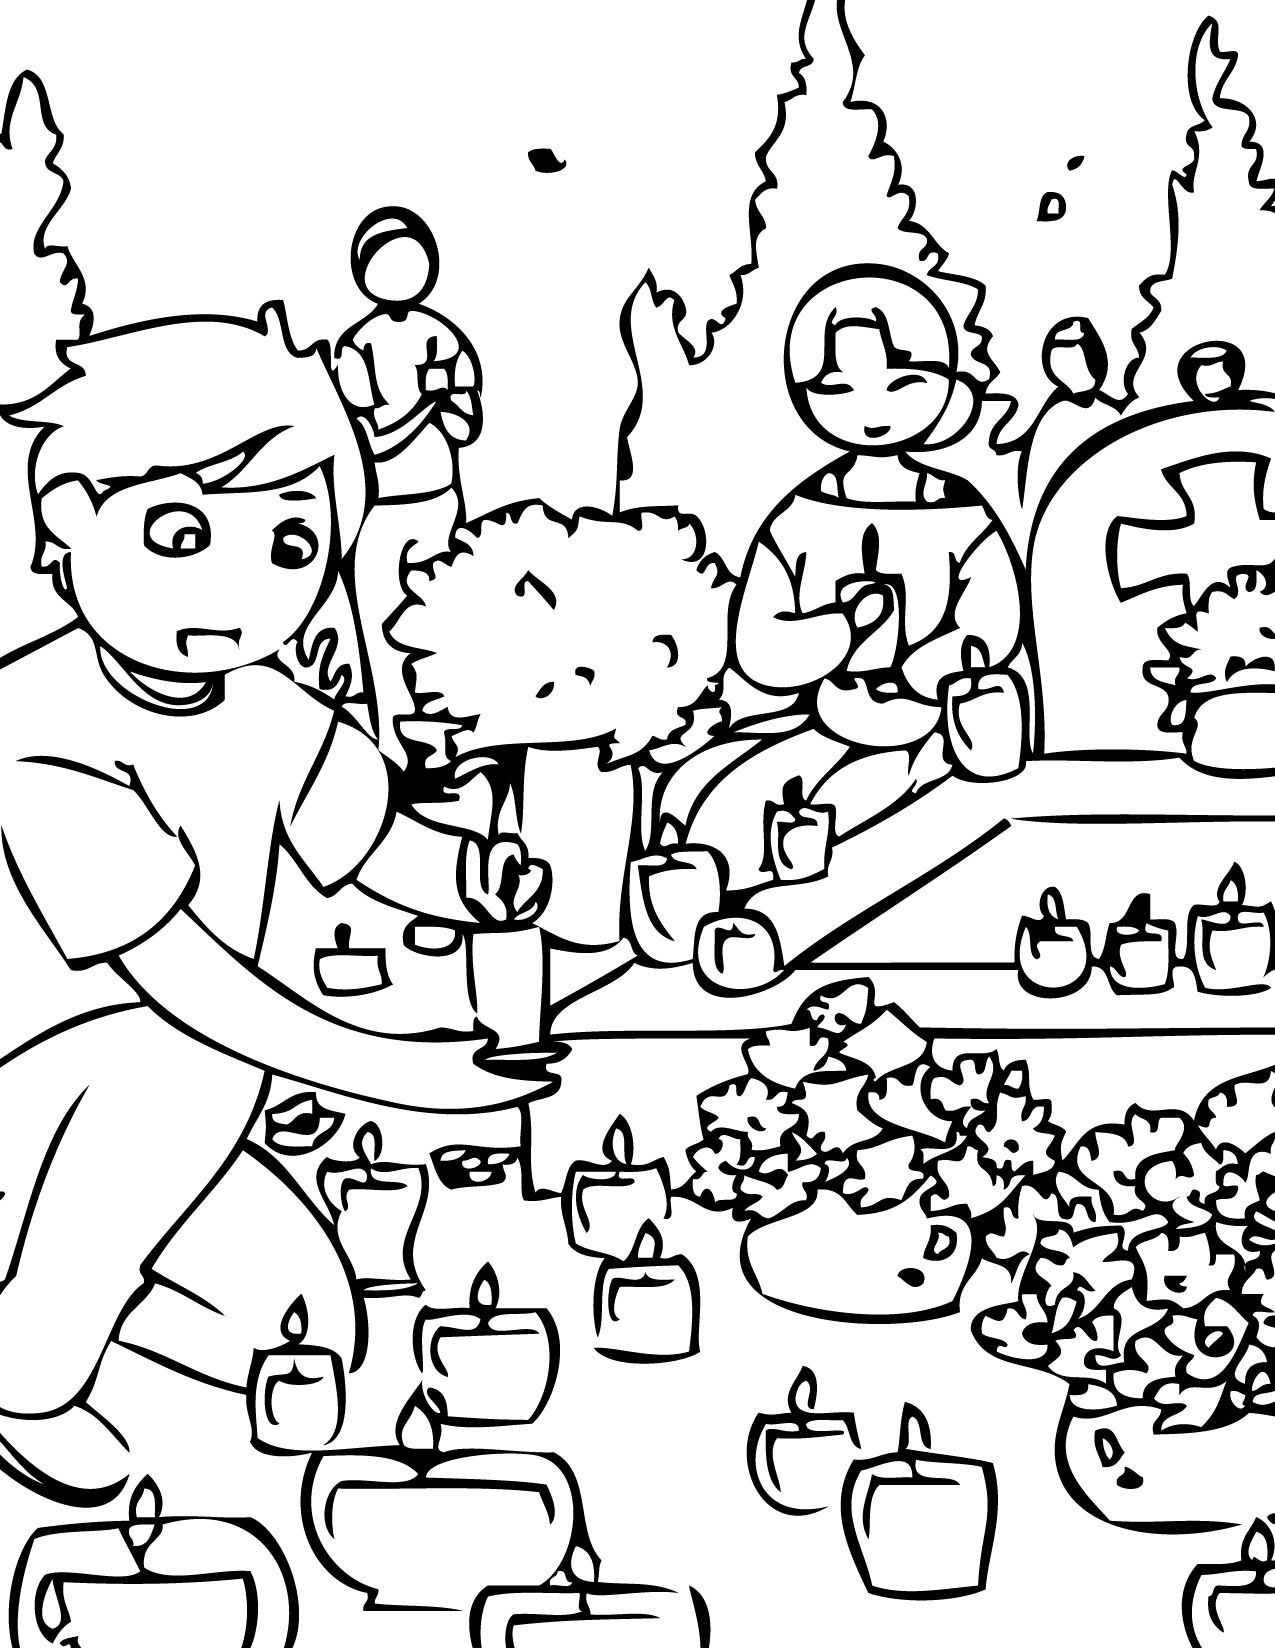 All Saints Day Coloring Pages - Coloring Home